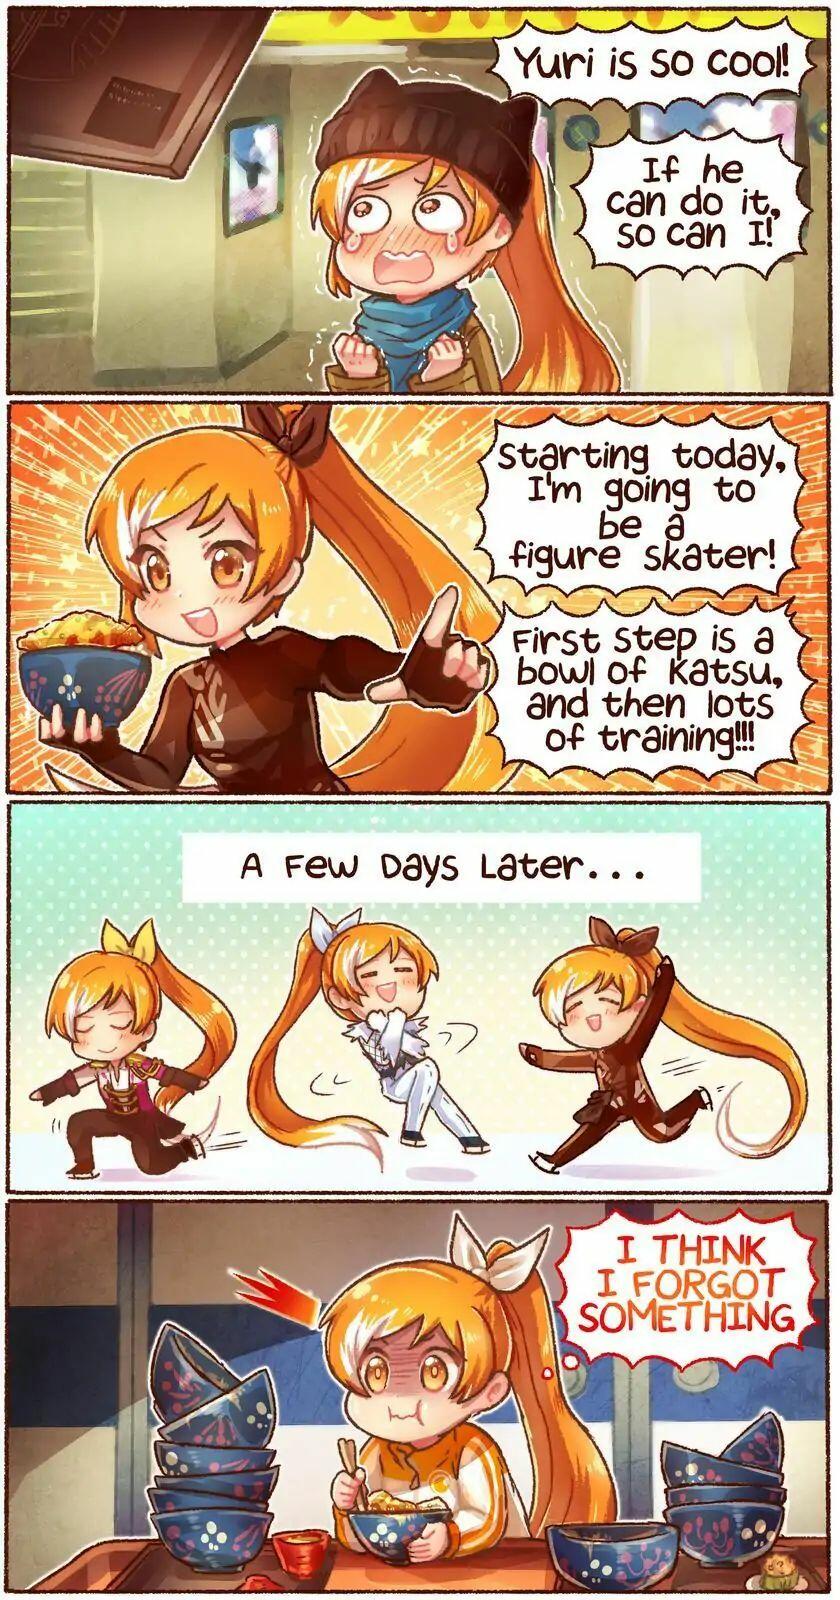 Read The Daily Life Of Crunchyroll-Hime Chapter 10 on Mangakakalot